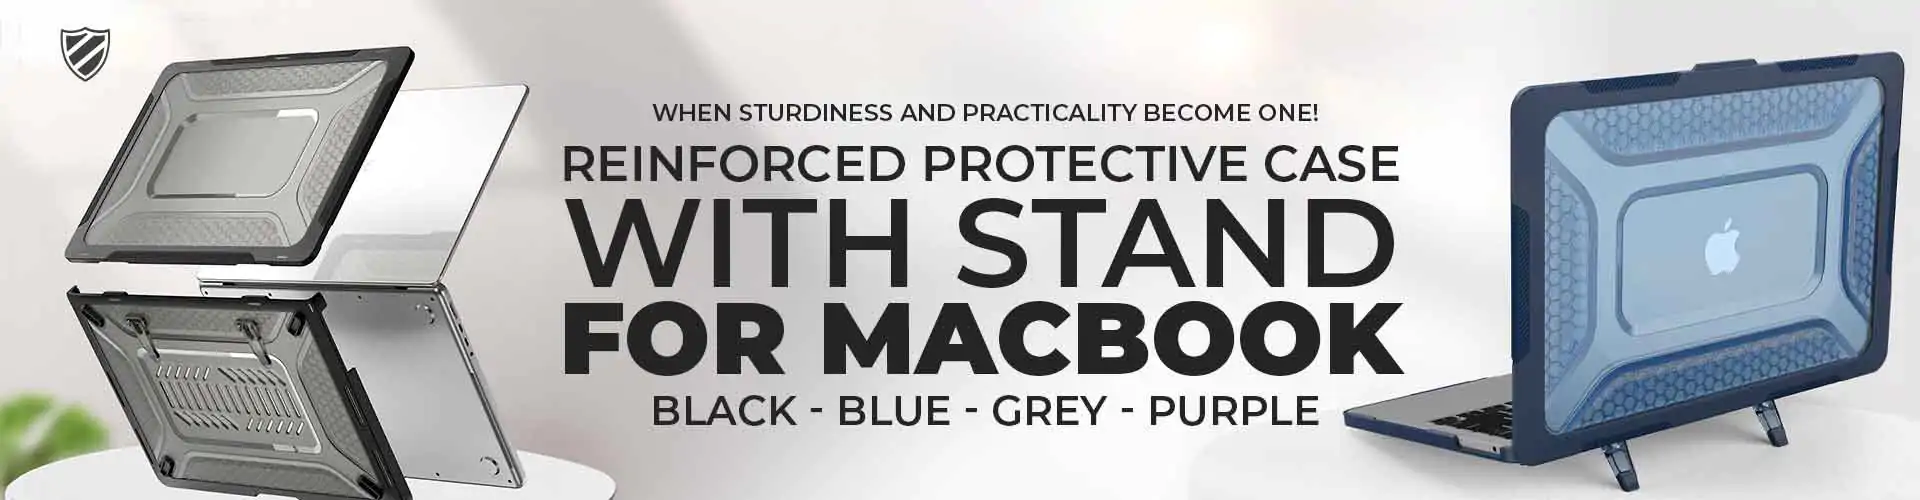 Reinforced Protective Case
with Stand
for macbook